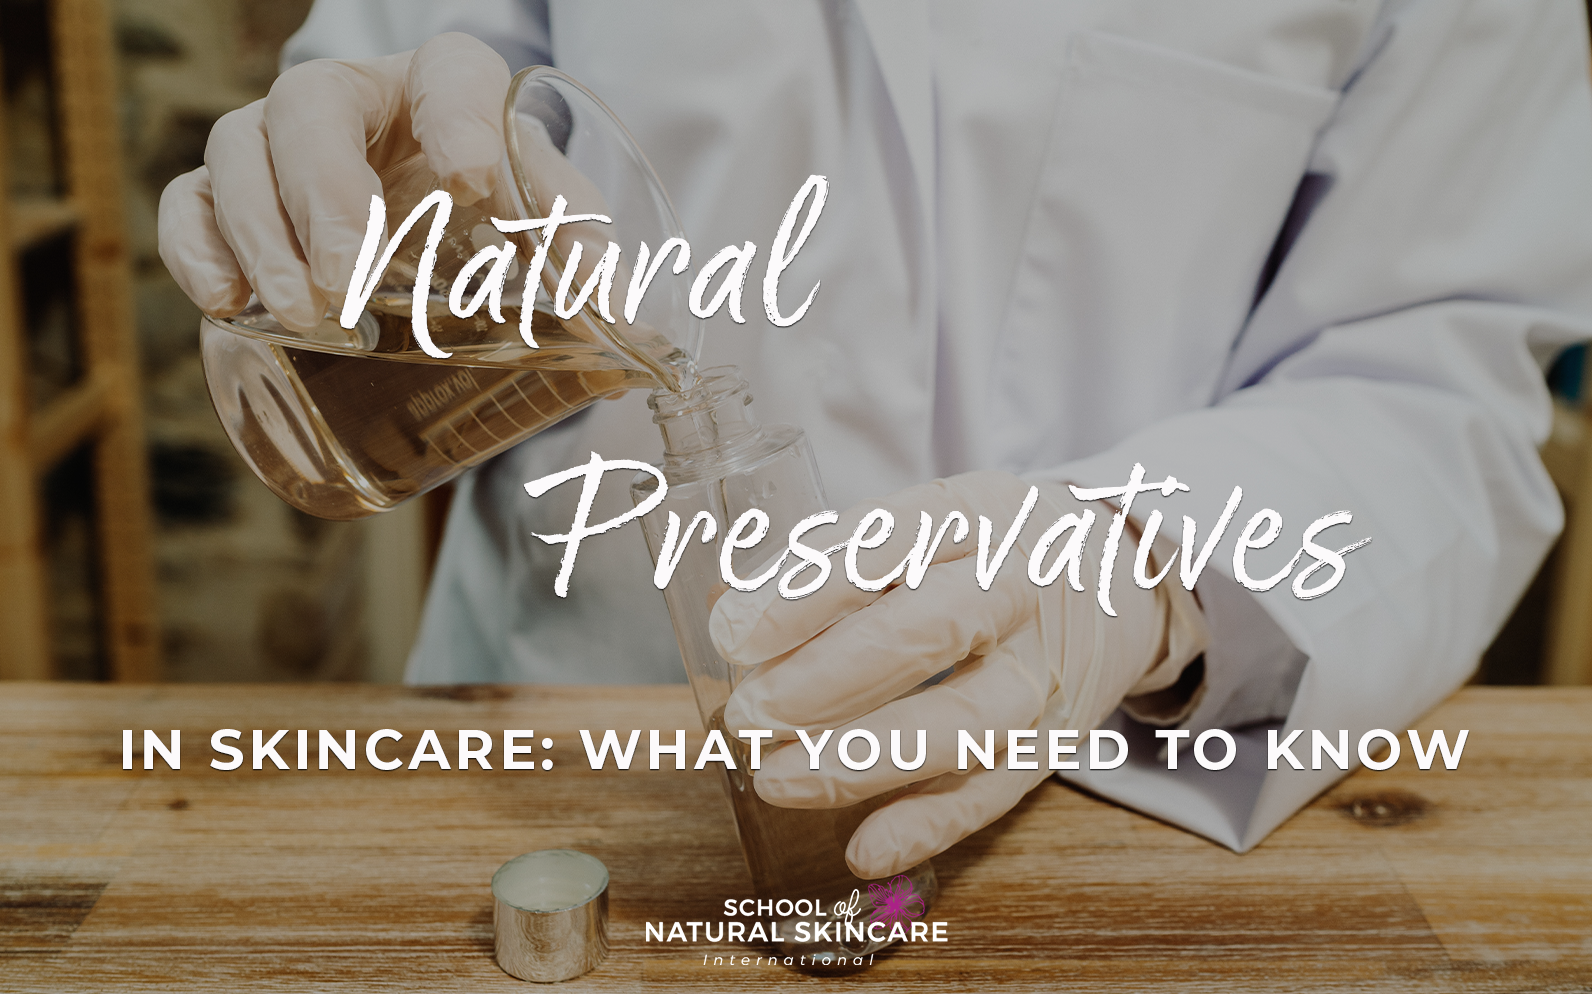 5 Things You Need To Know About Using Preservatives in Skin Care